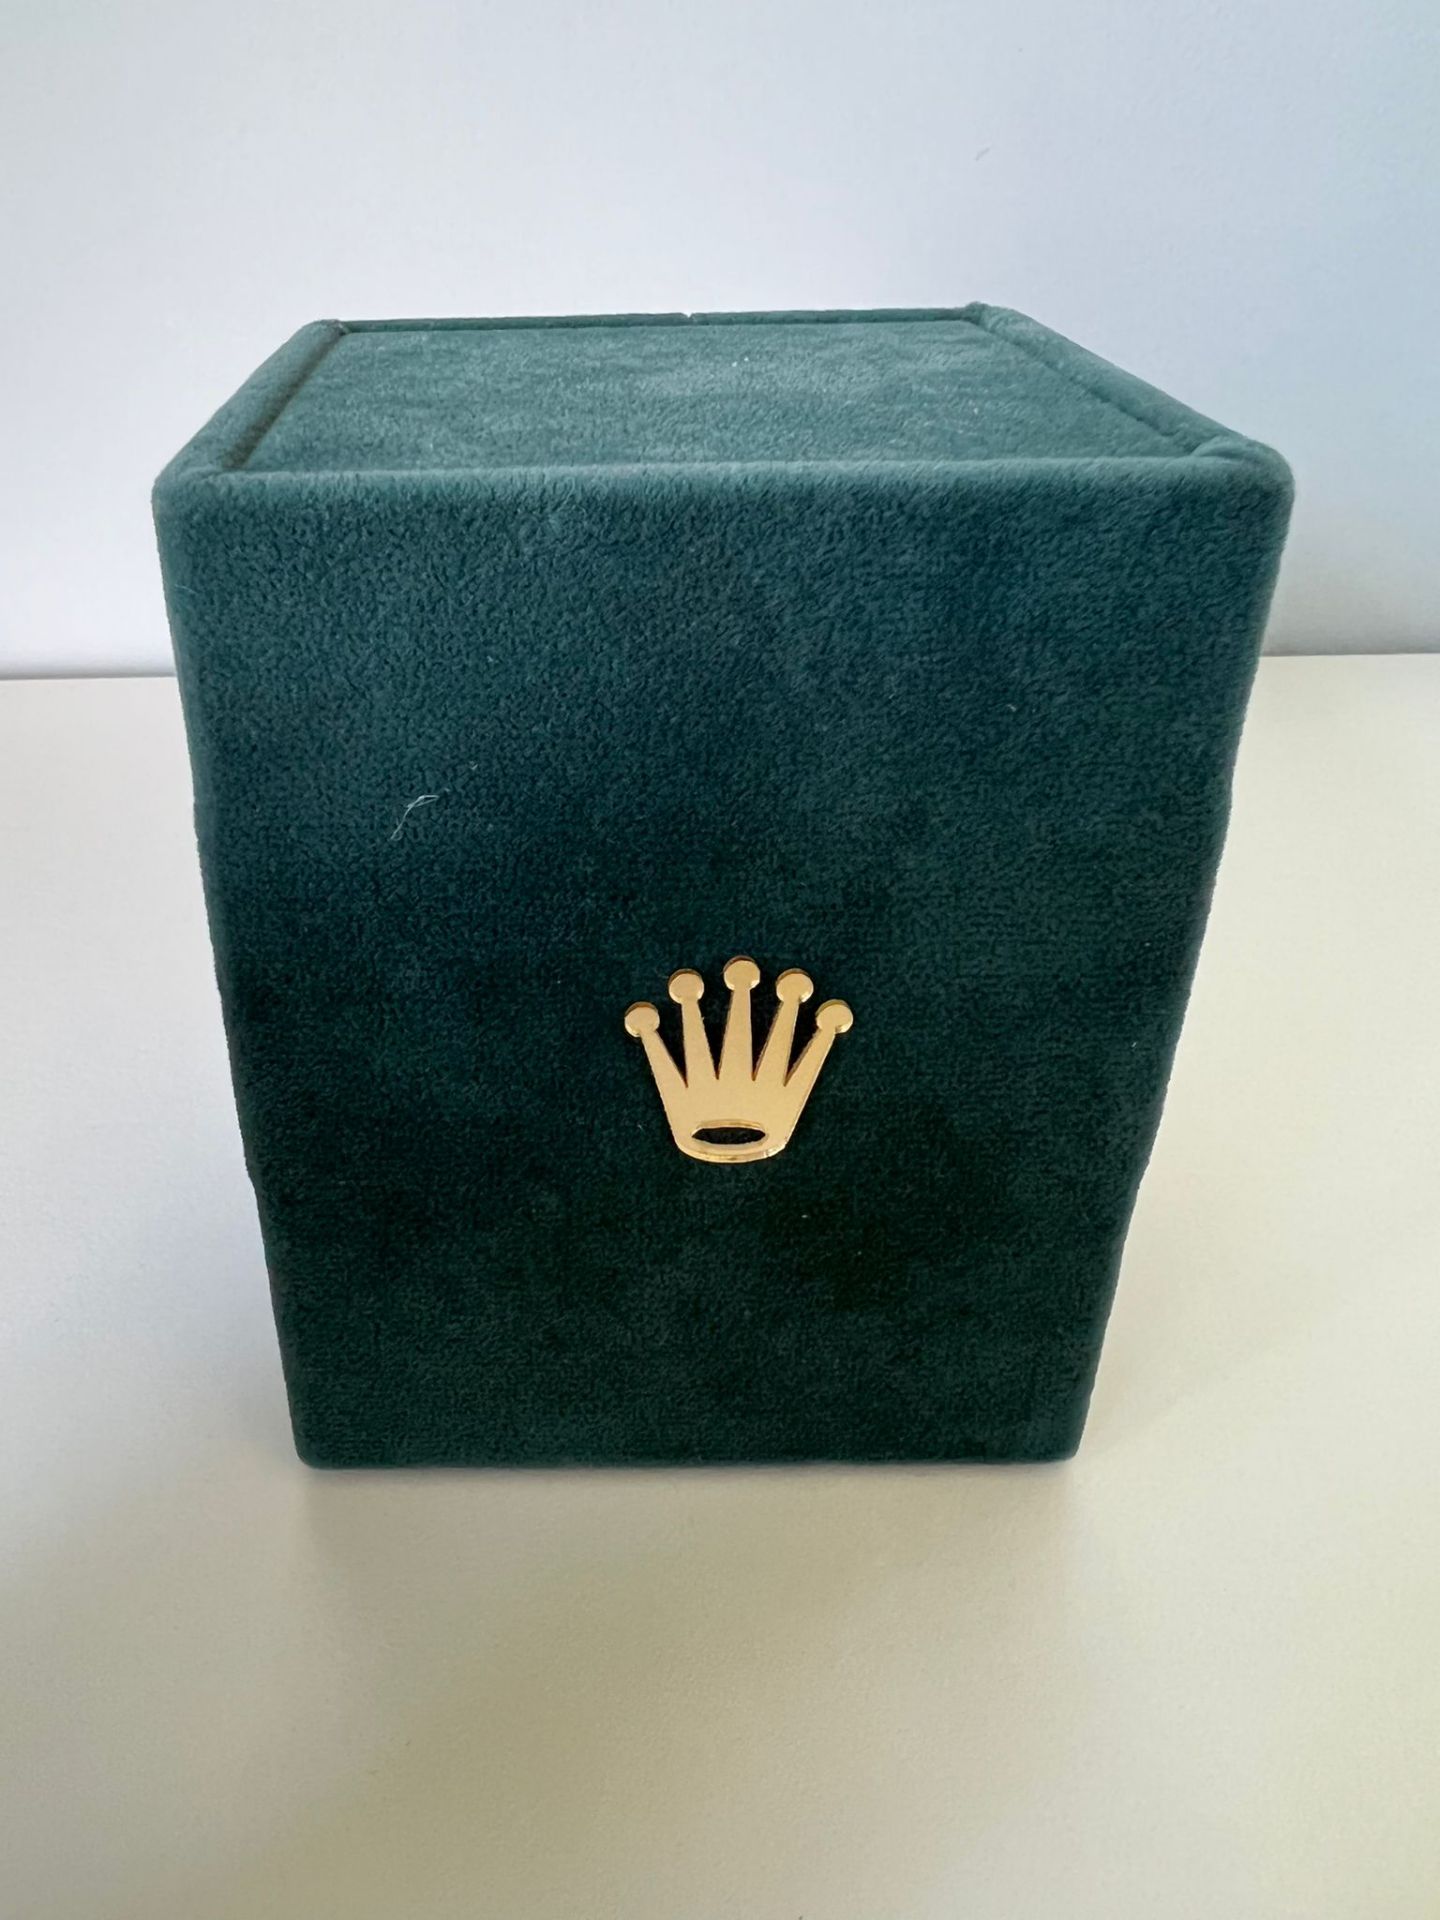 ROLEX OYSTER PERPETUAL DATE WATCH, C/W BOX *NO VAT* - Image 7 of 7